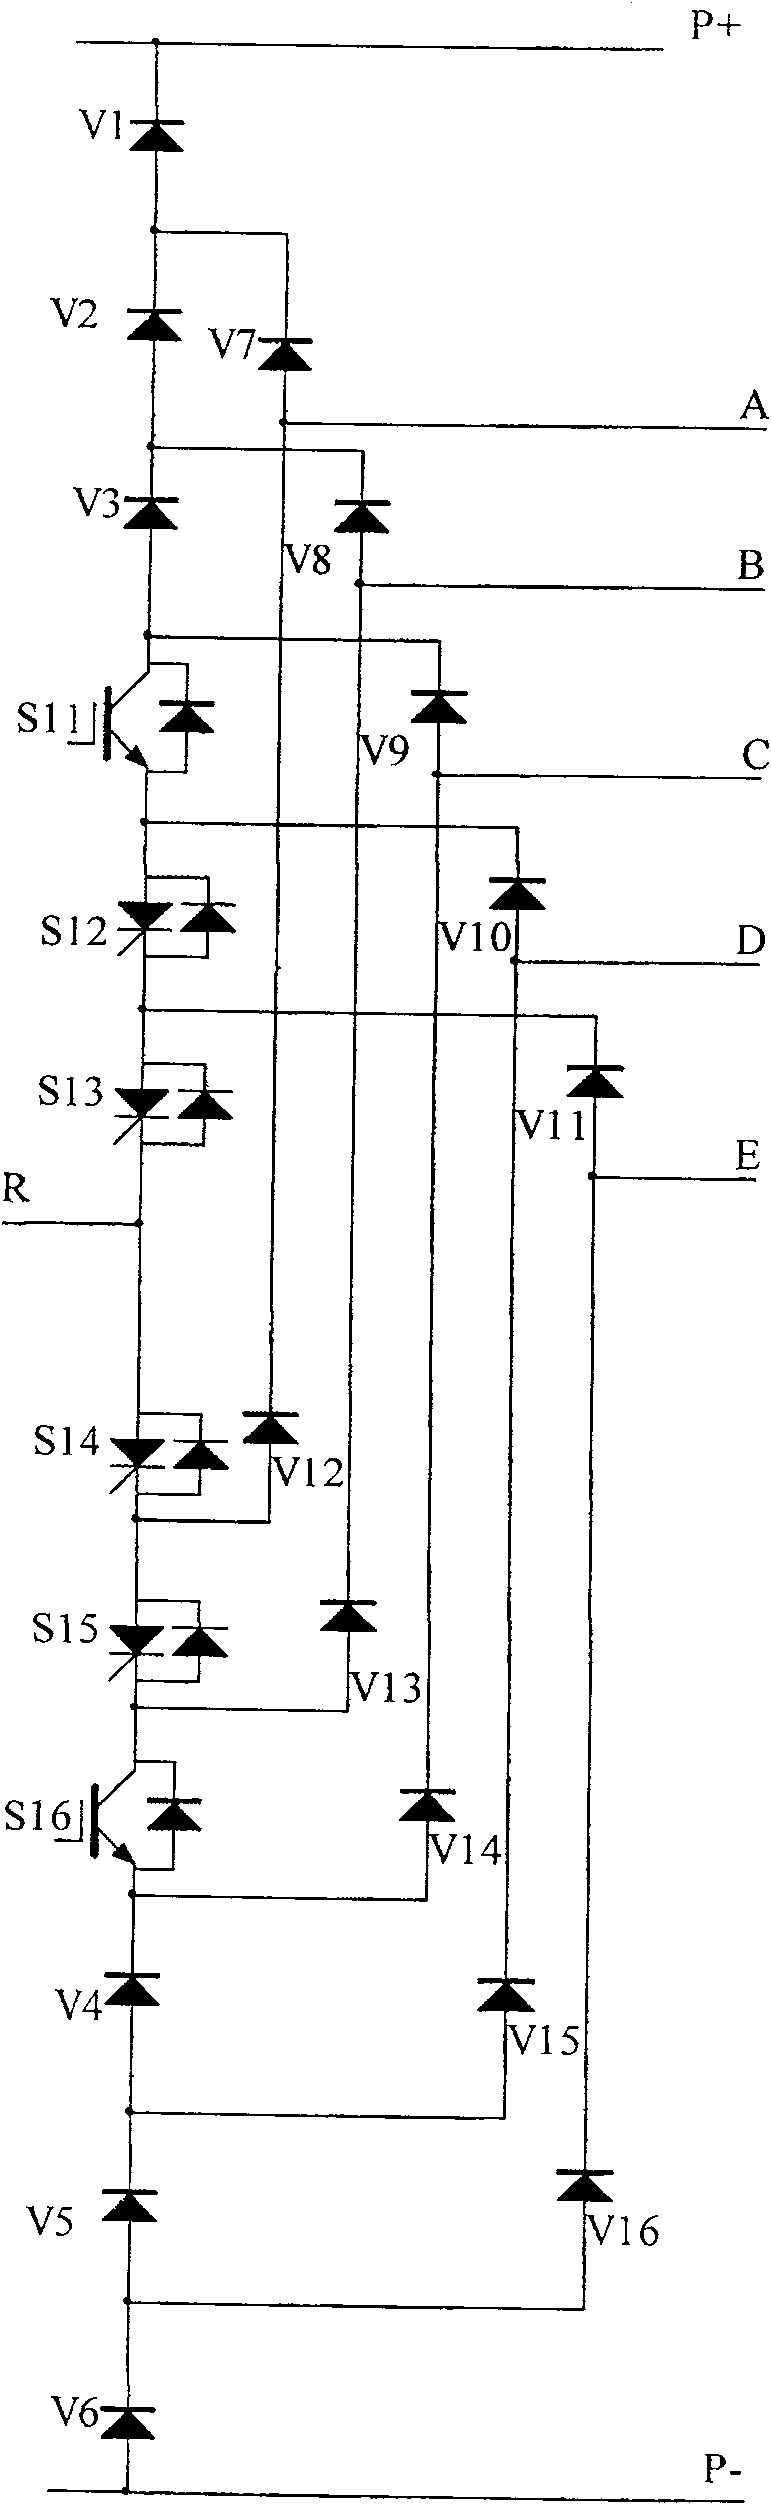 Seven power level high voltage frequency converter